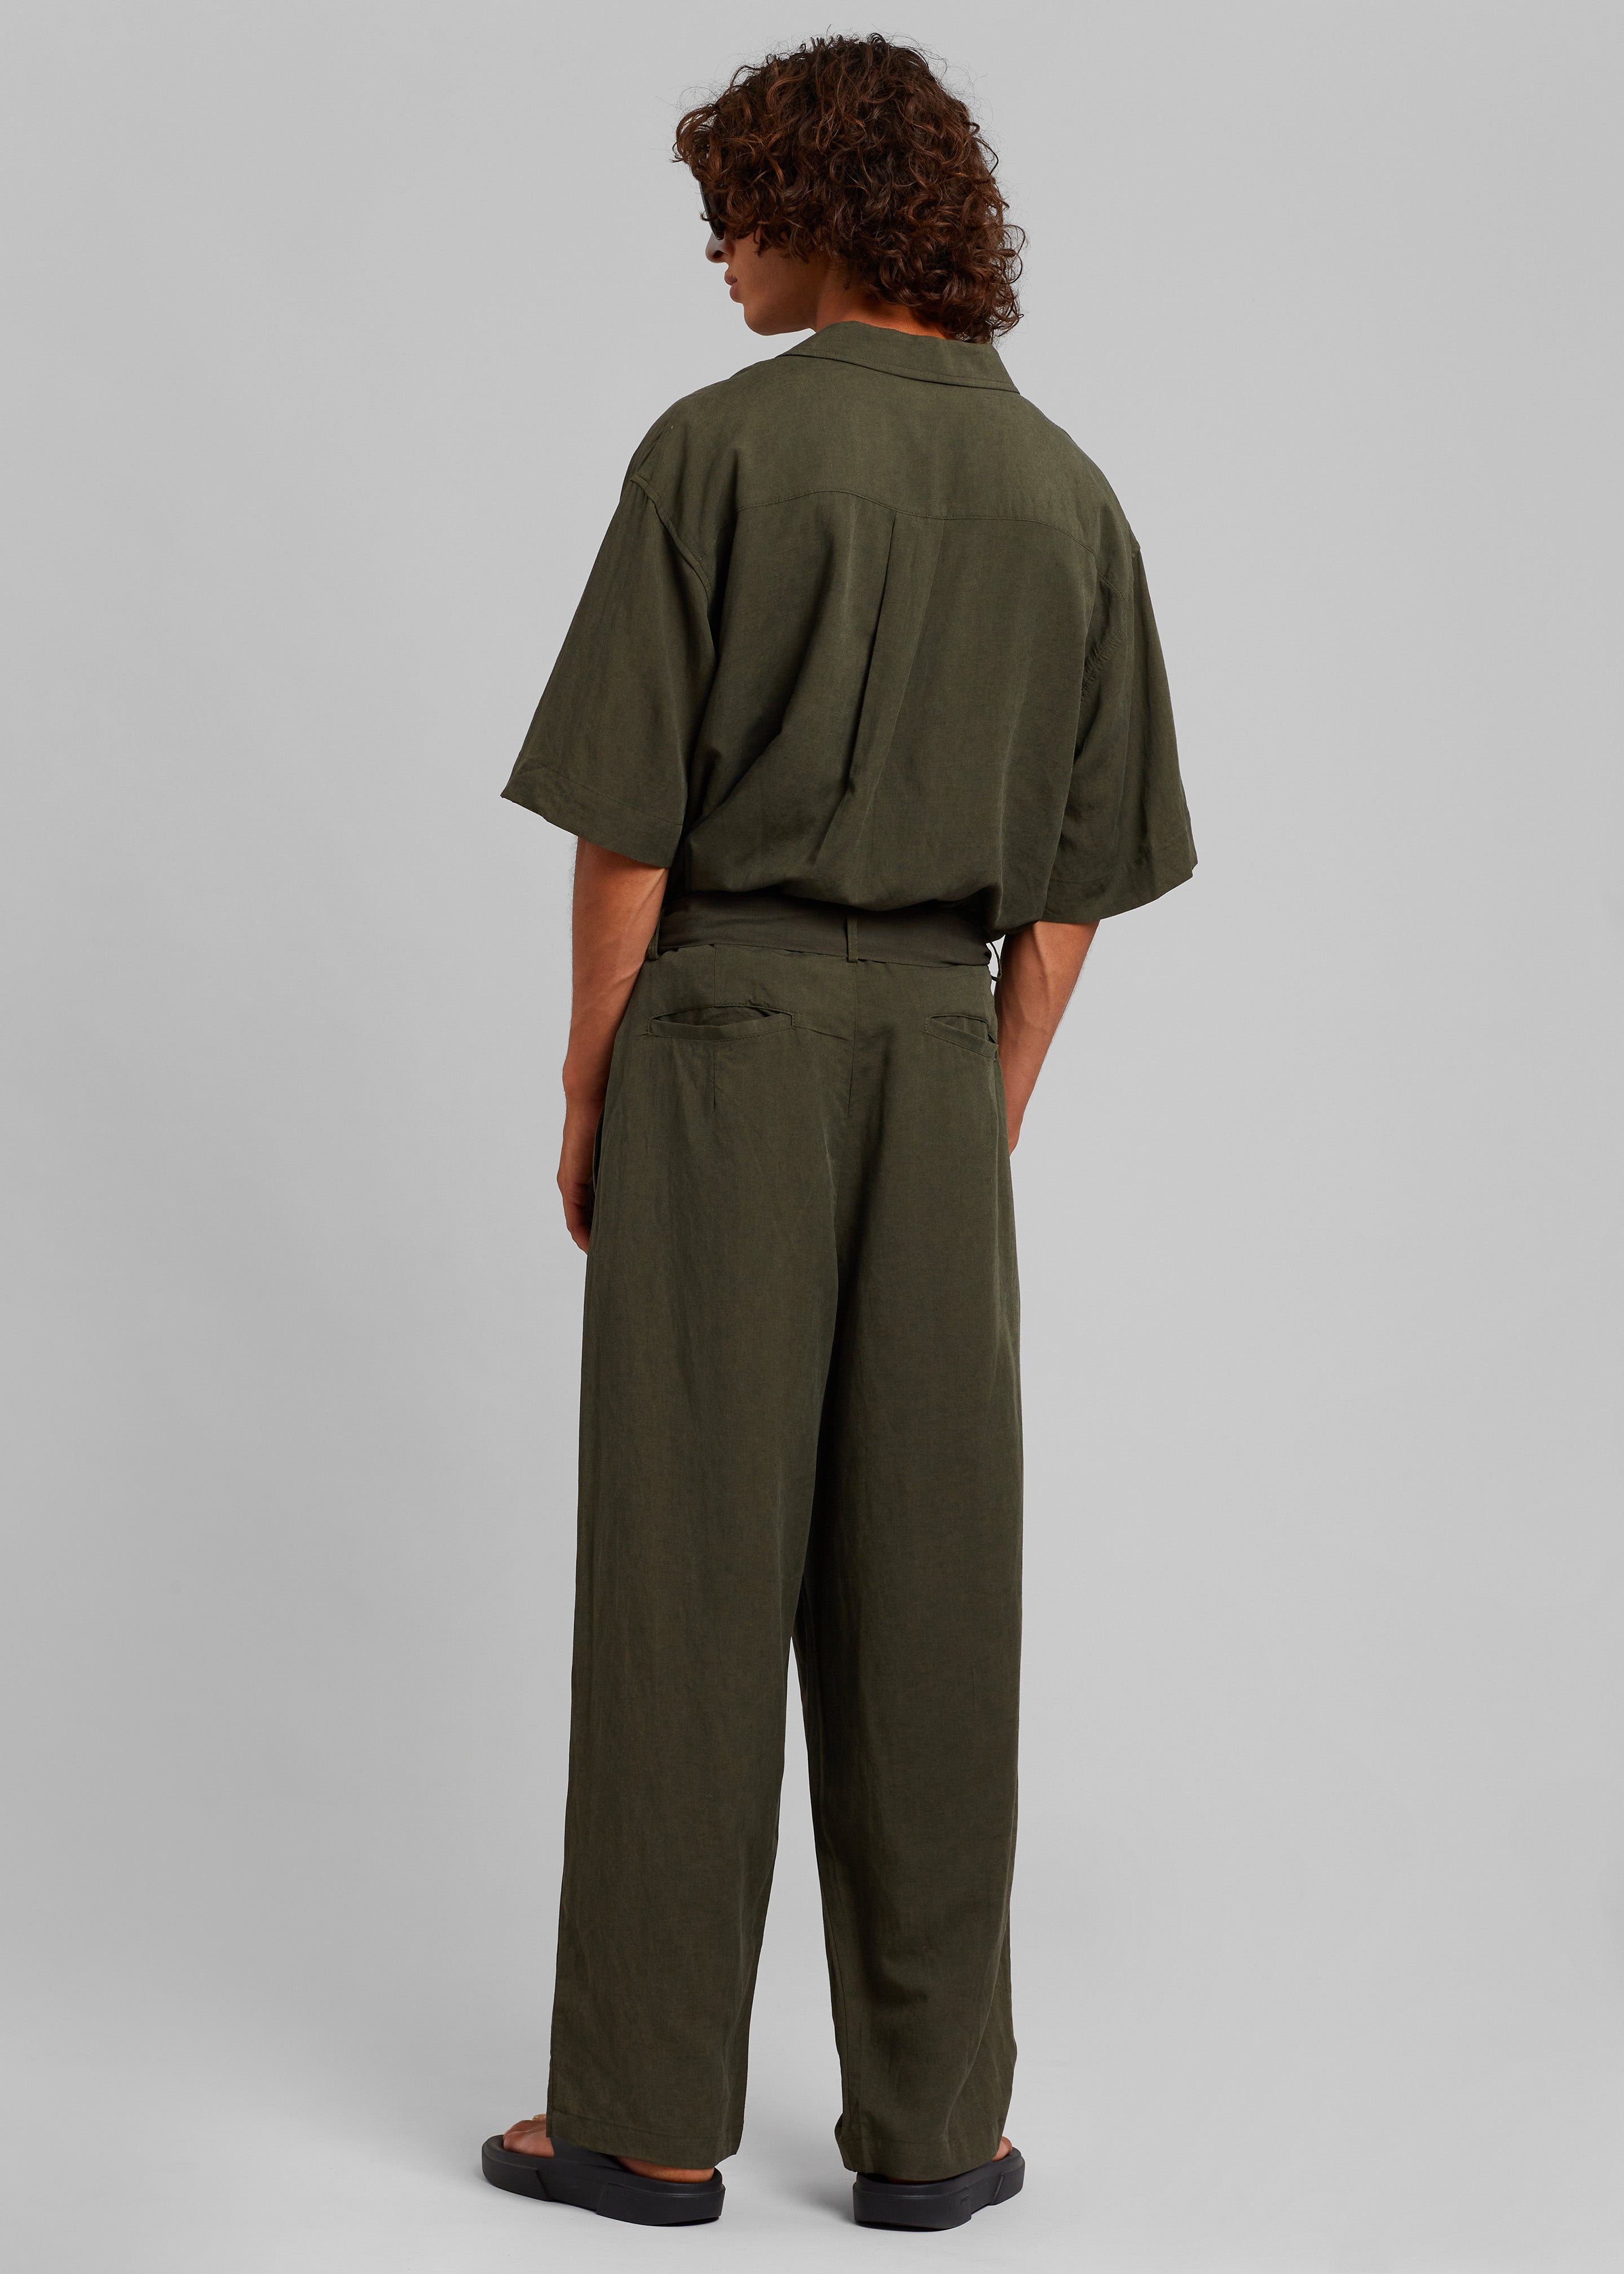 Georg Puch Pants - Olive - 7